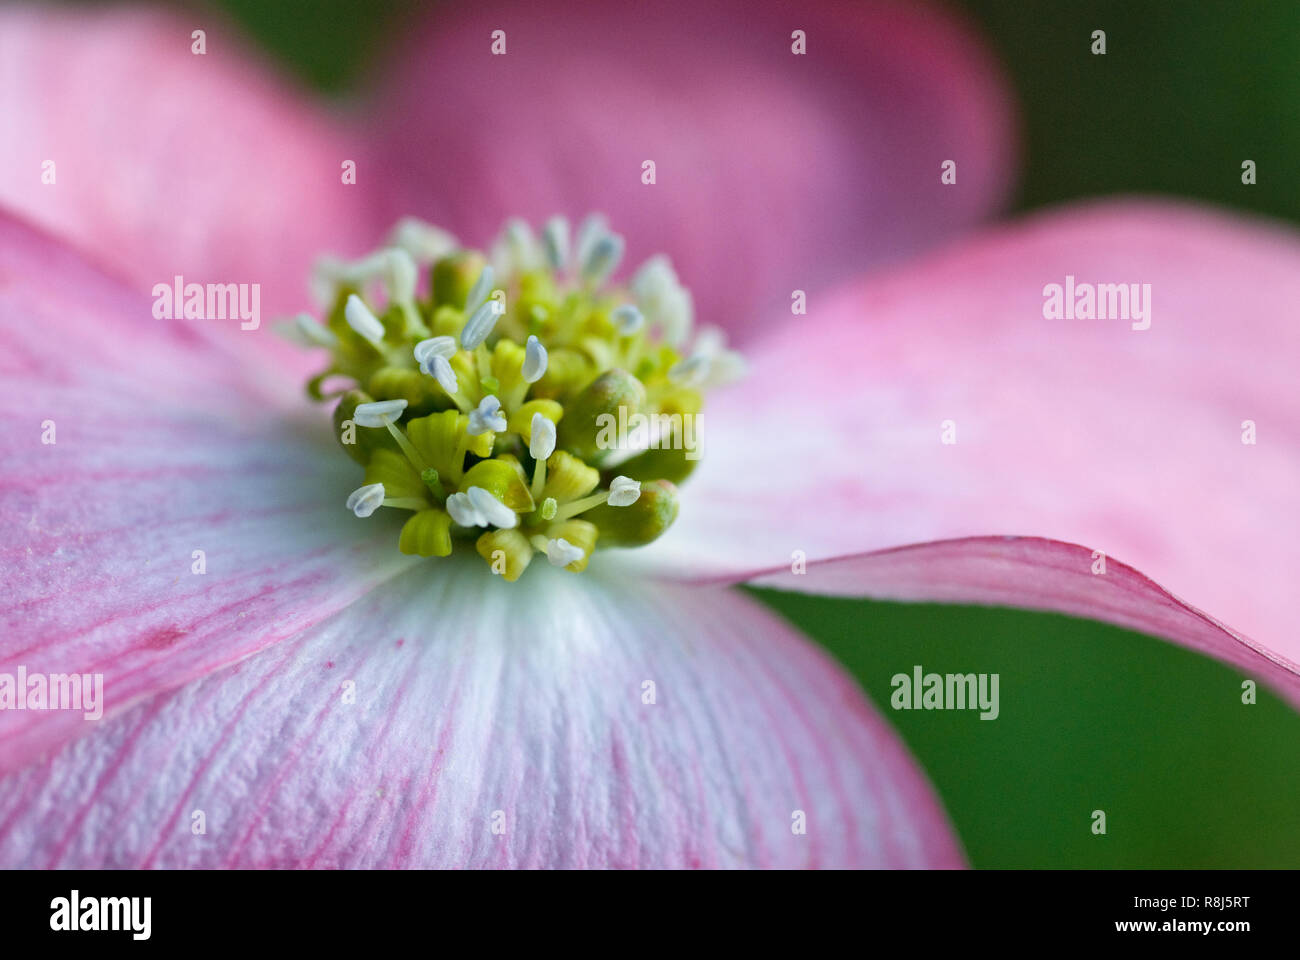 Blooming flowers of pink dogwood (Cornus florida rubra) encircled by pink bracts (which are commonly thought of as the dogwood flower's petals but whi Stock Photo